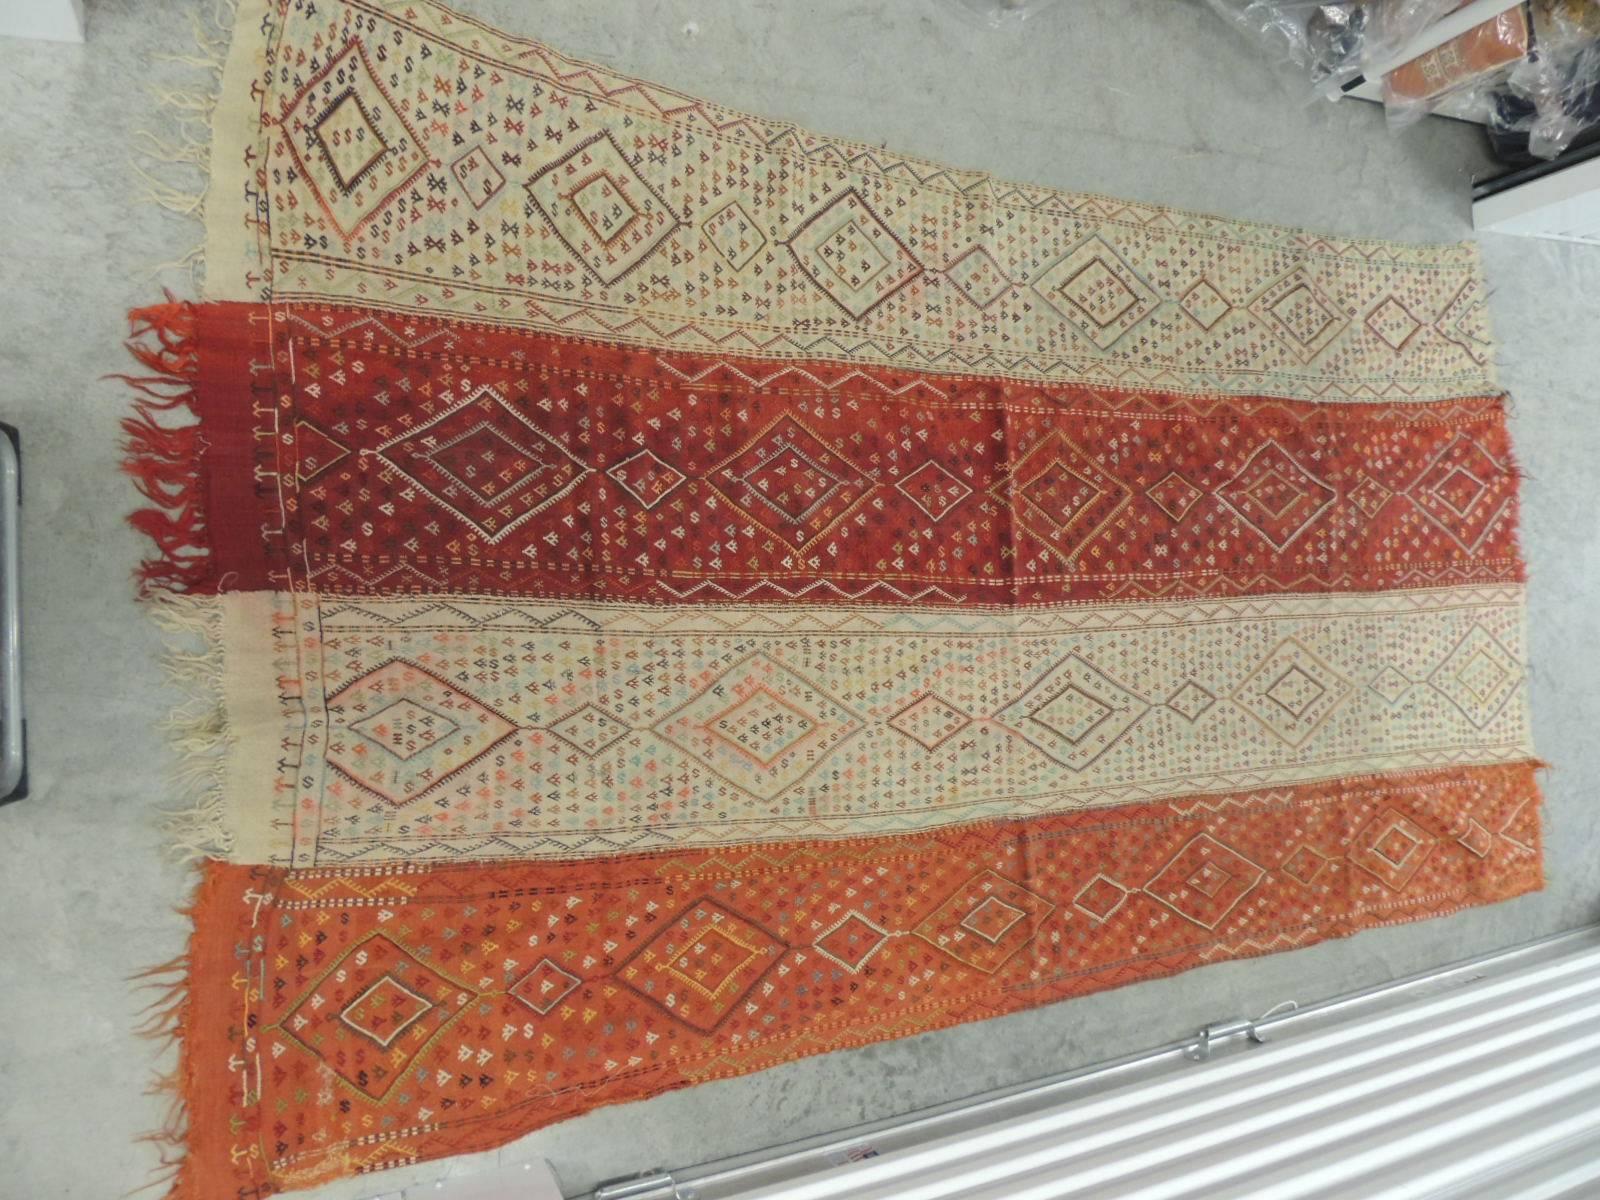 Turkish handwoven wall hanging textile with fringes. Large colorful textile with tribal pattern.
Woven strips of home-spun wool creates this amazing textile in shades of yellow, red, natural, orange, blue and black.
Could be use as a table cloth,